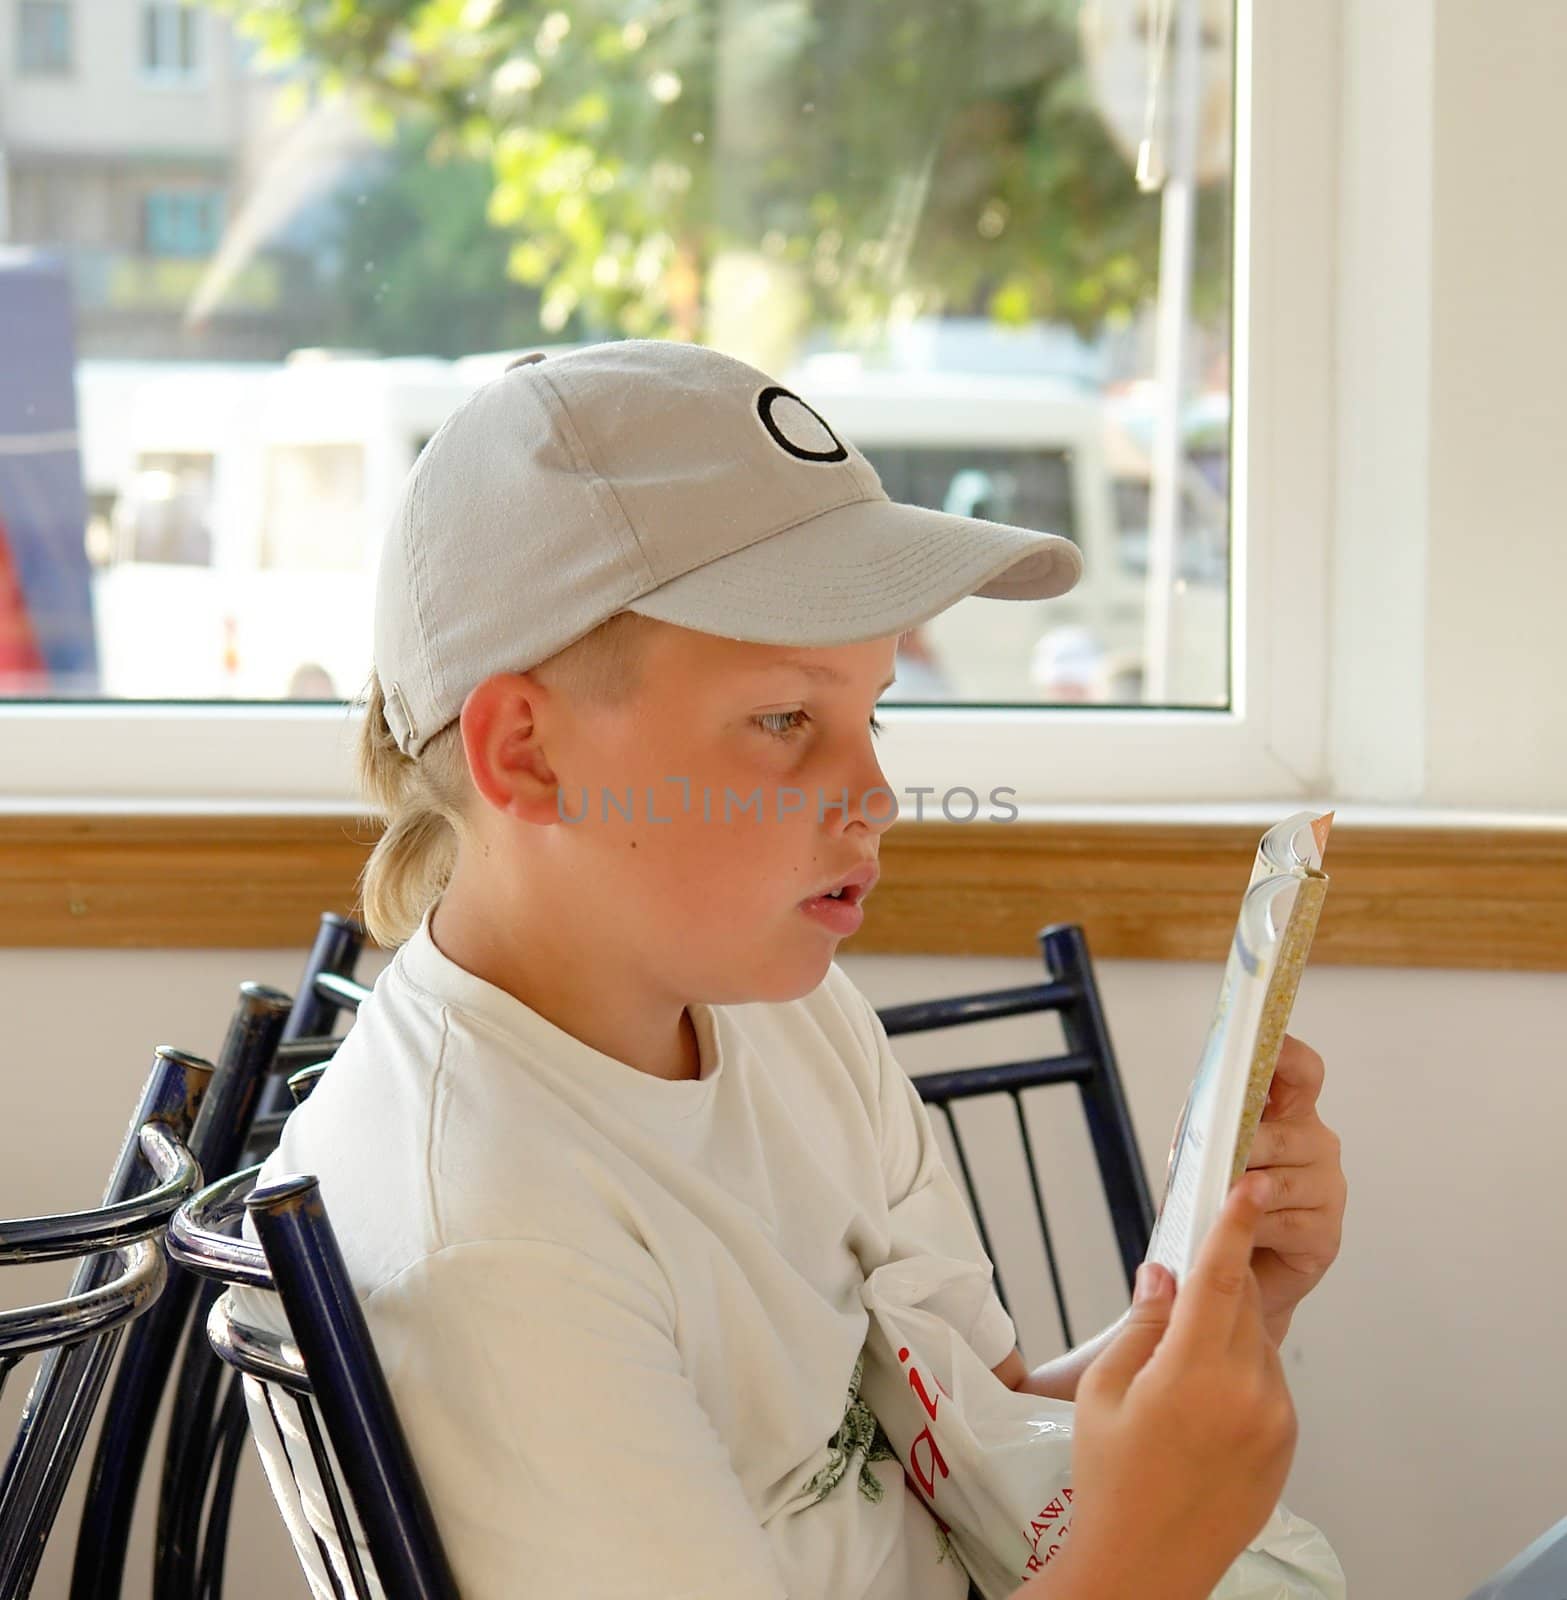 The little boy reads the book in cafe